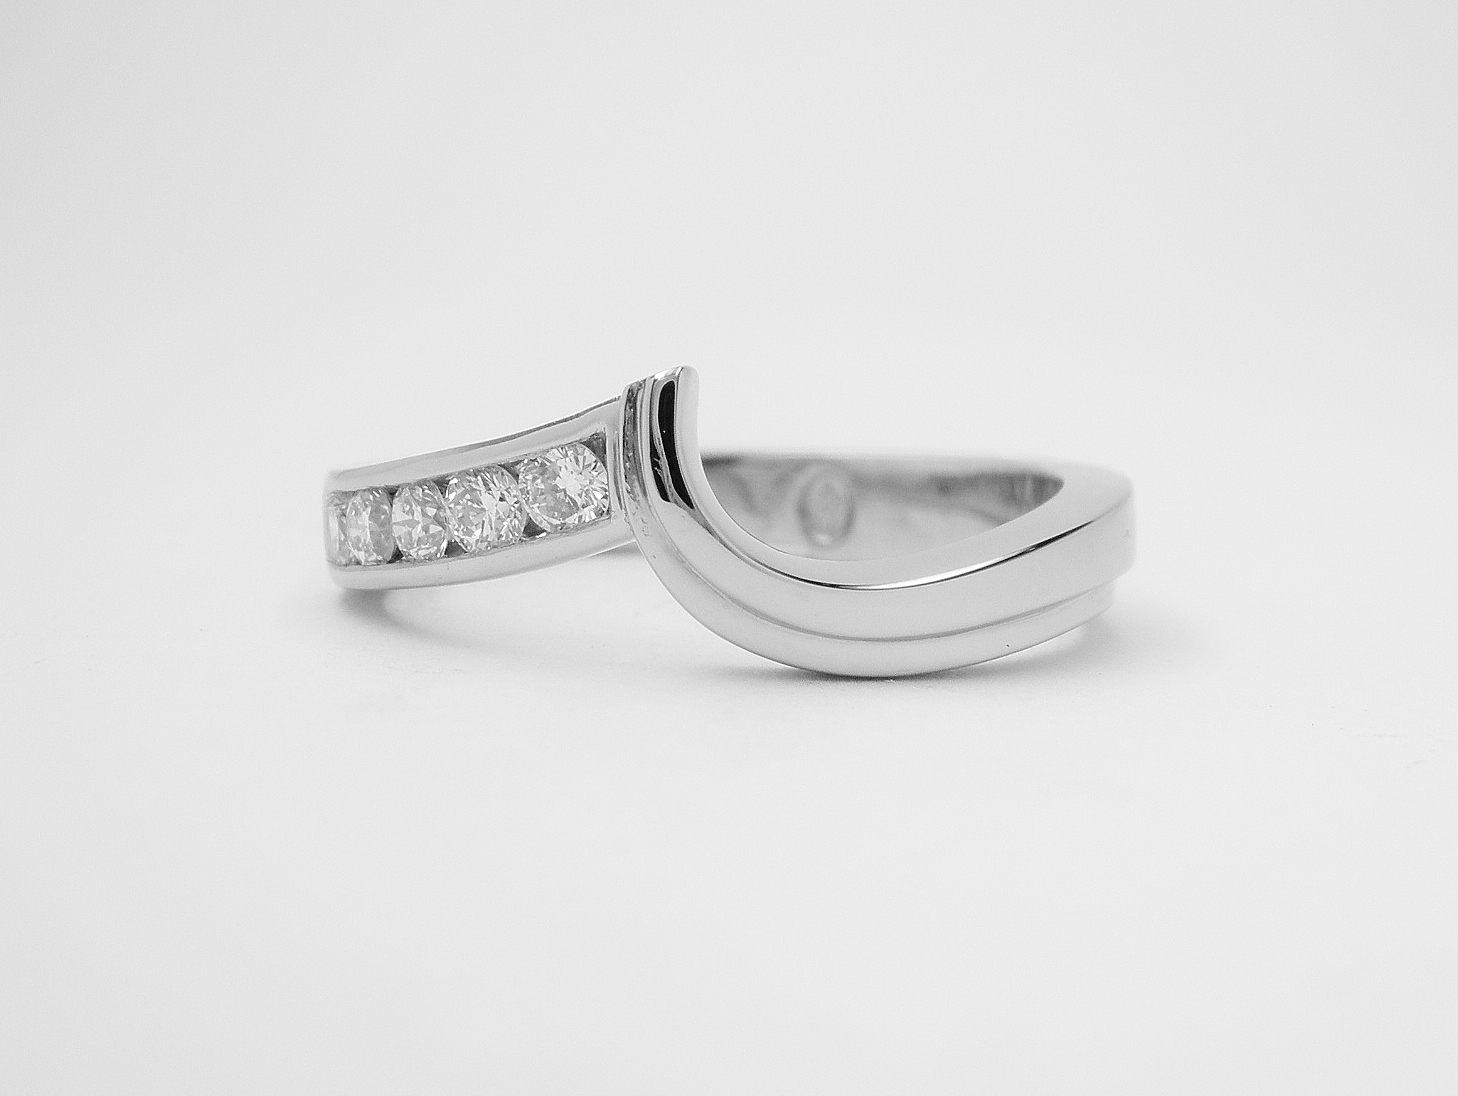 Palladium shaped wedding ring with channel set diamonds on one side & shaped to fit with a single stone diamond open shouldered wishbone cross-over ring.